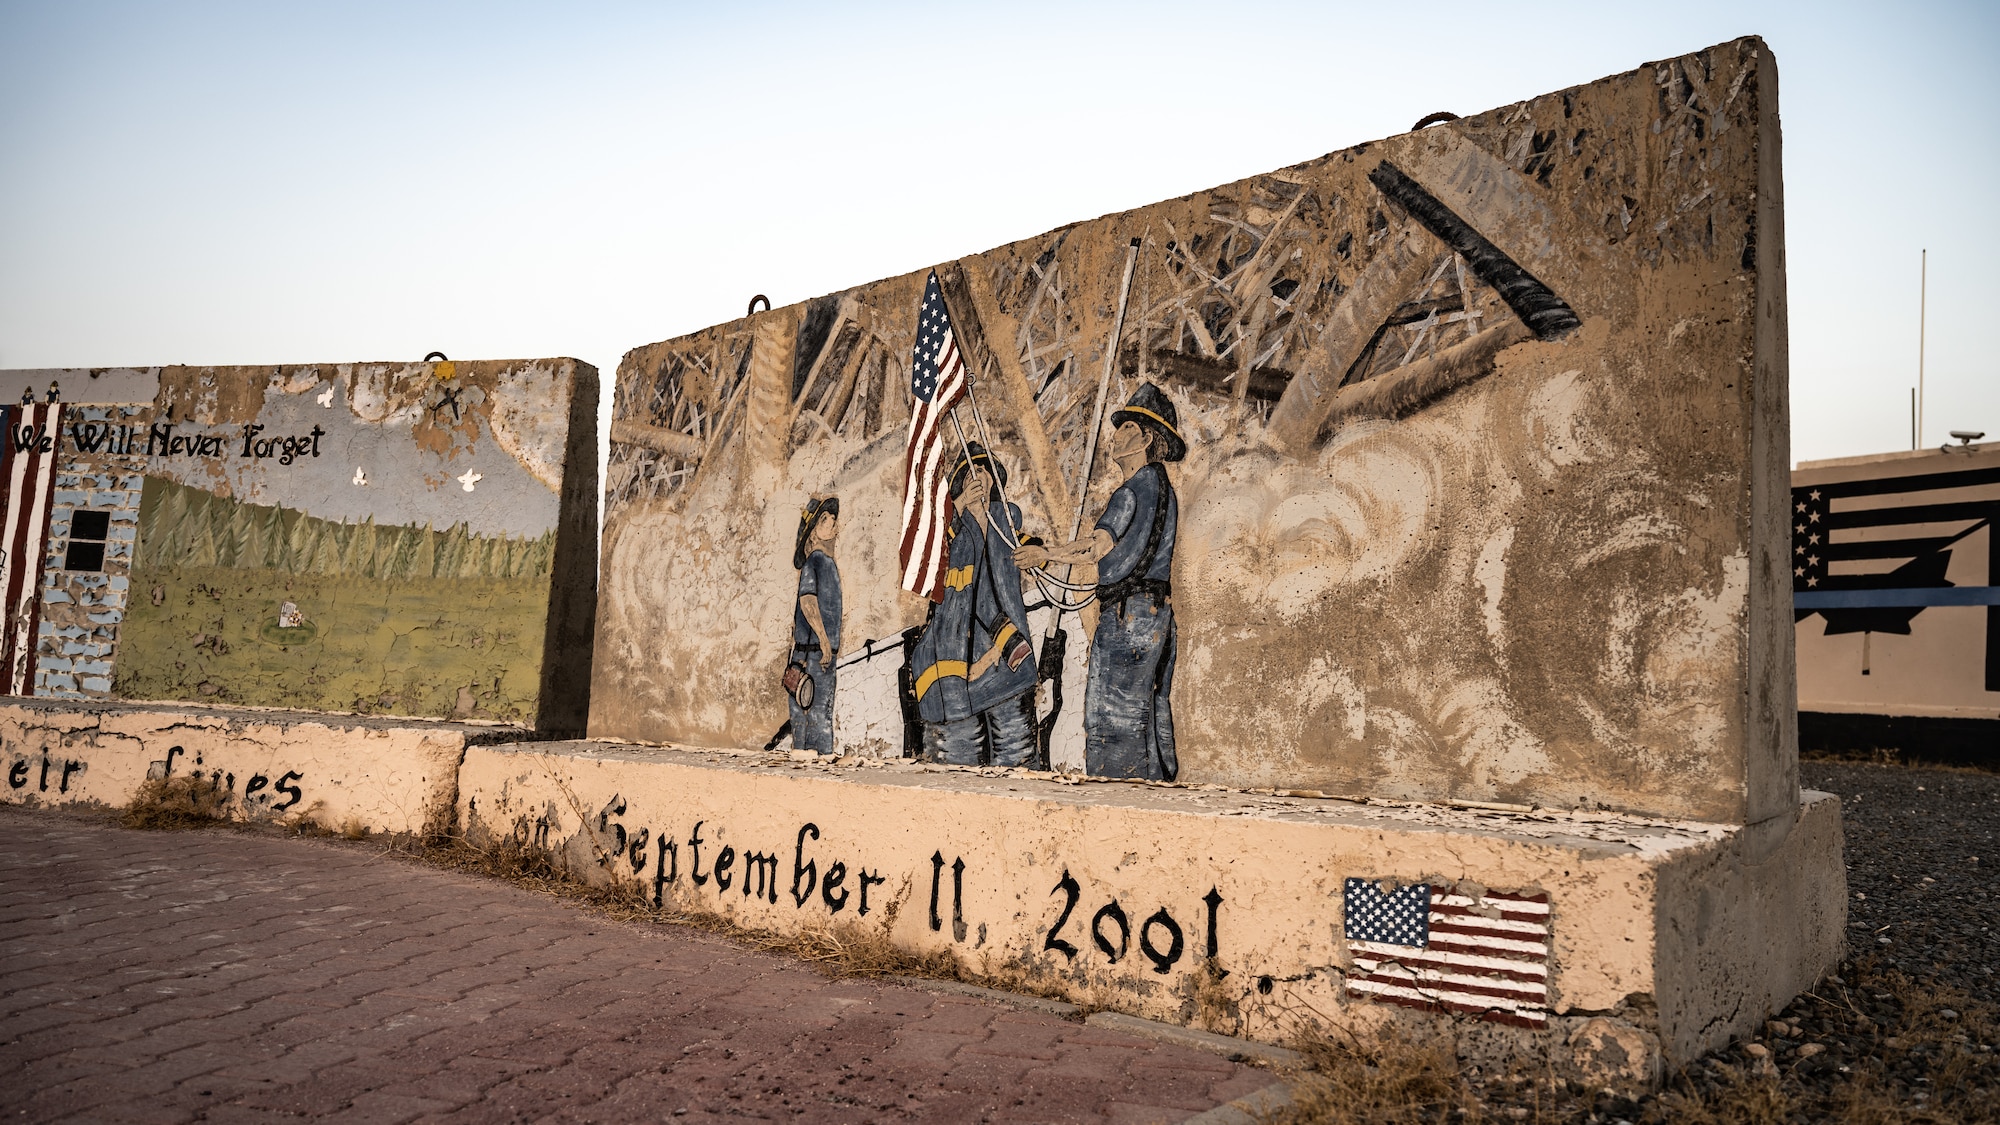 The 9/11 memorial display, weathered from the years under the desert sun, catches the sunrise at Ali Al Salem Air Base, Kuwait, Sept. 11, 2023. Service members from the U.S., Canada, Italy, and Denmark gathered together today for a moment of silence followed by a ruck march in remembrance of the innocent lives lost during the attacks on this fateful day 22 years ago. Sharing the past with our coalition partners secures a brighter future for us all. (U.S. Air Force photo by Staff Sgt. Kevin Long)